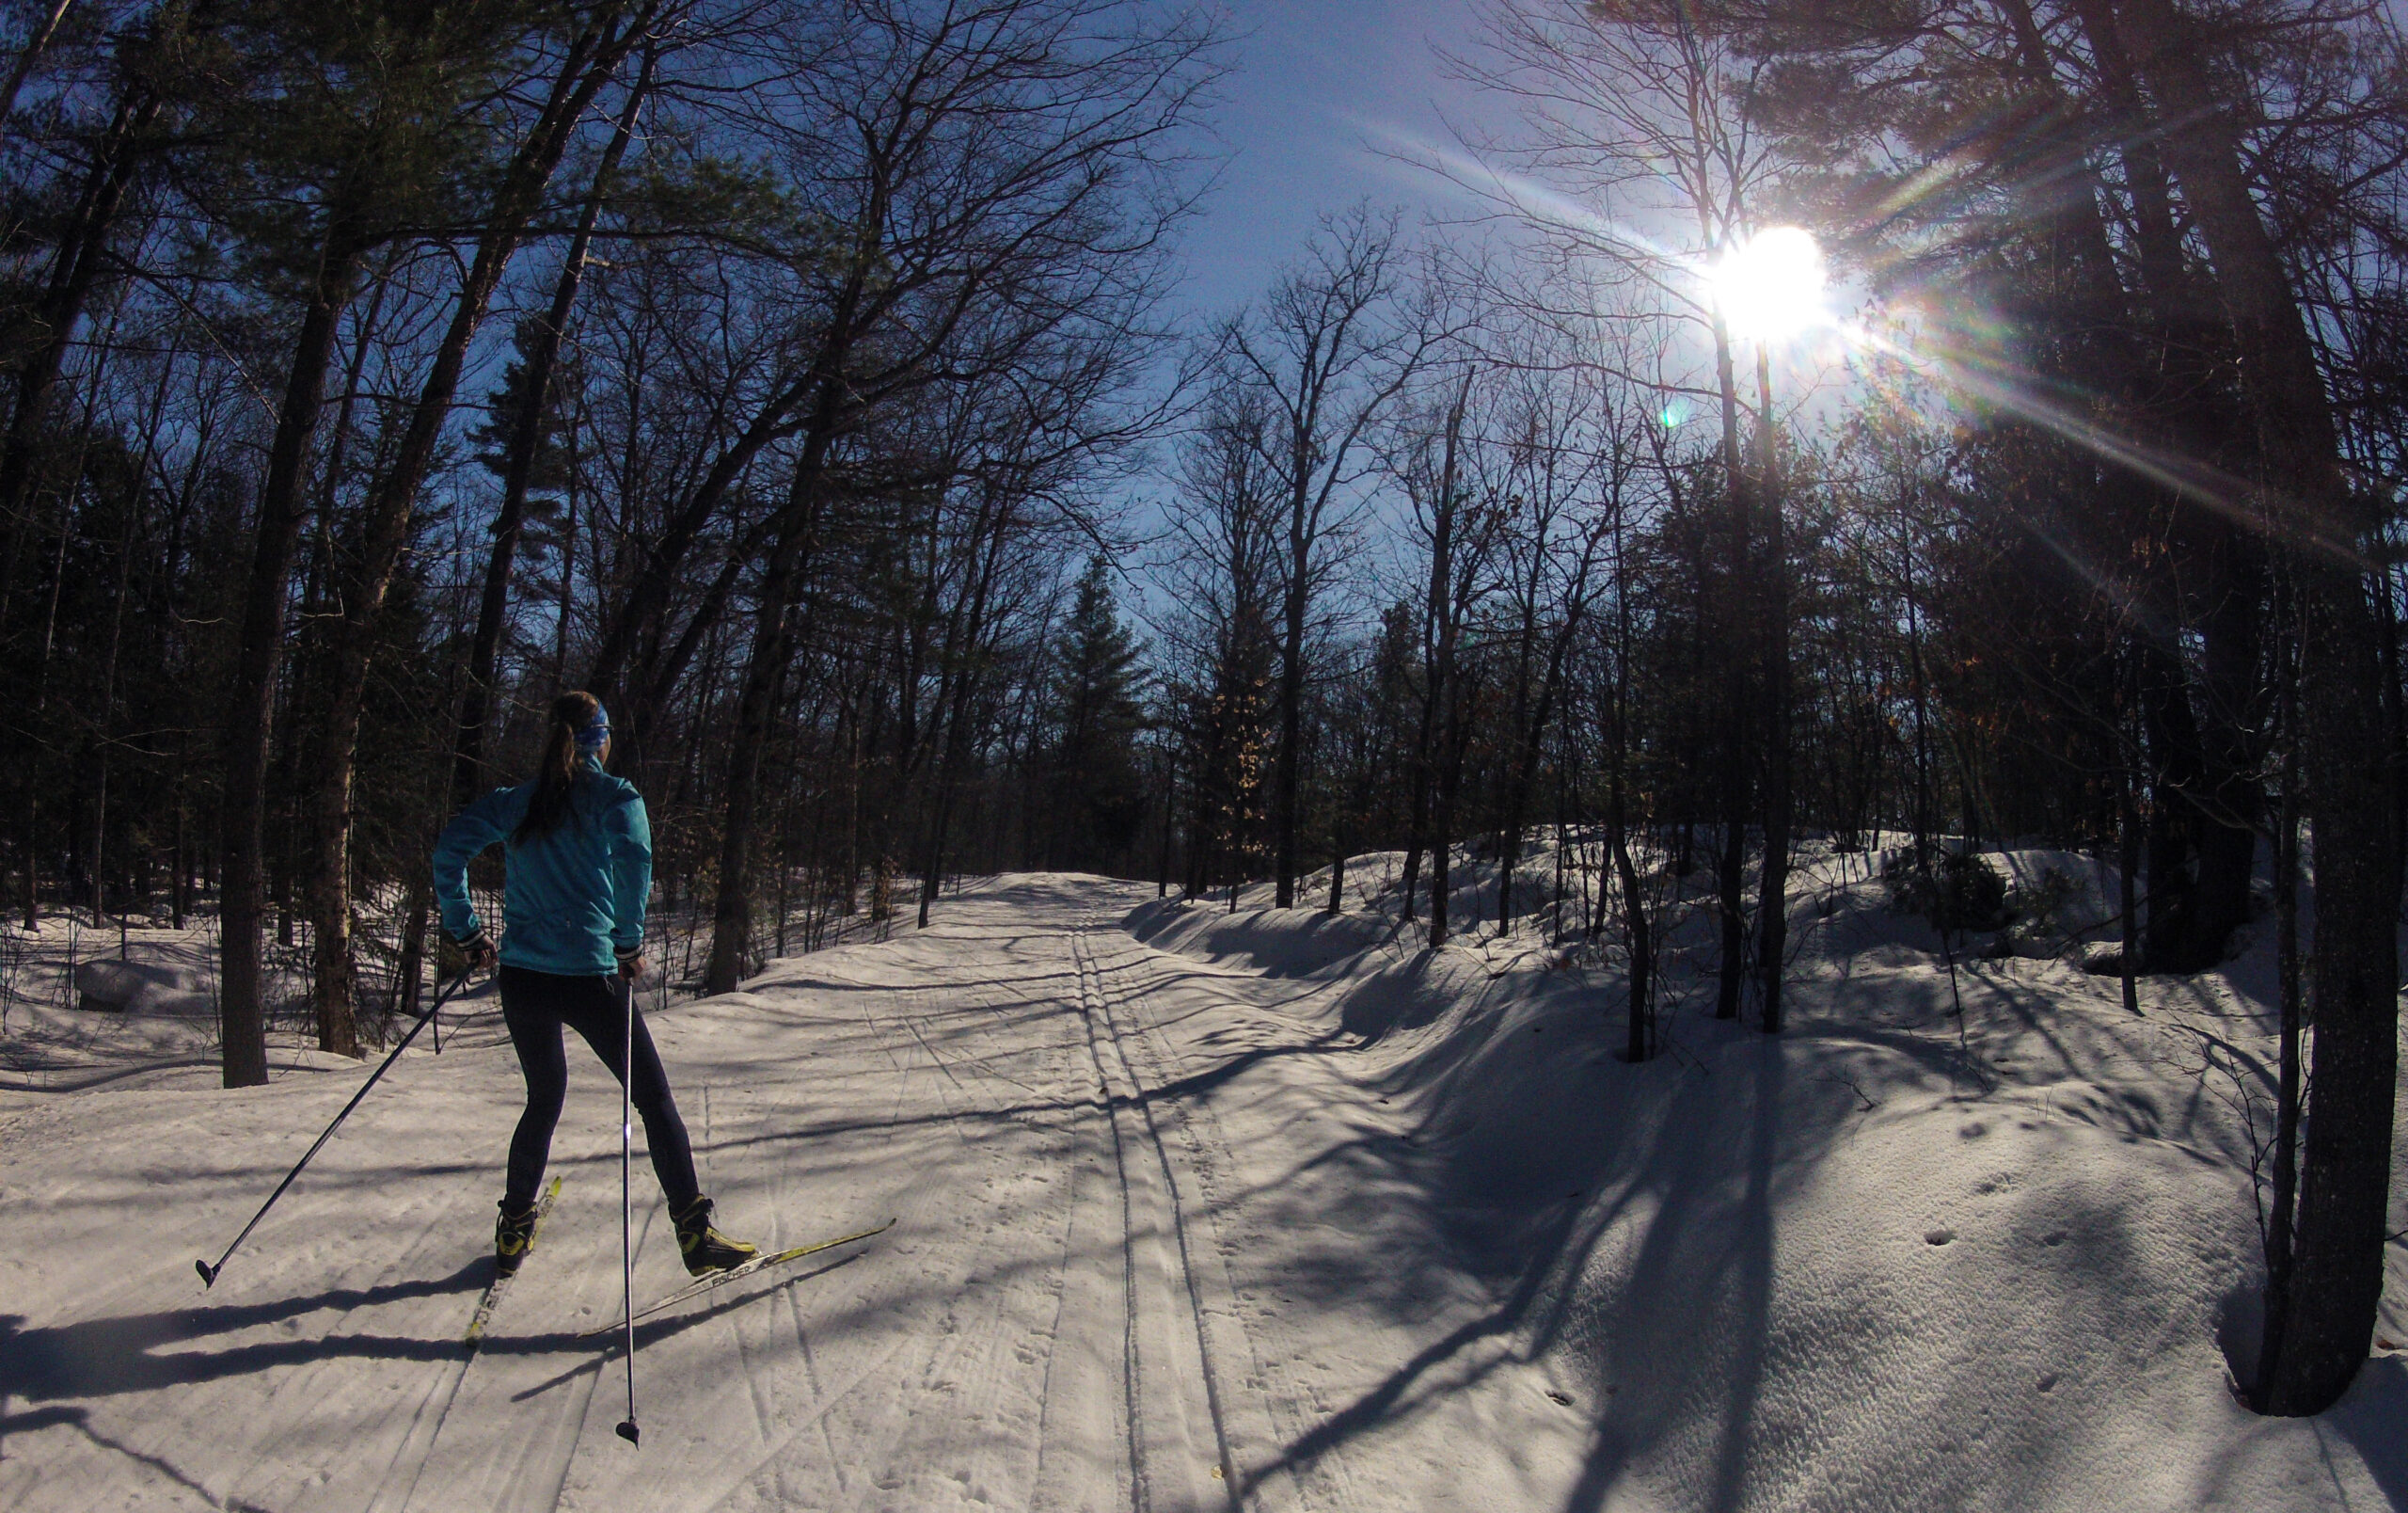 Skate skiing along the trail on a bright winter day. Photo credit: Peter Istvan